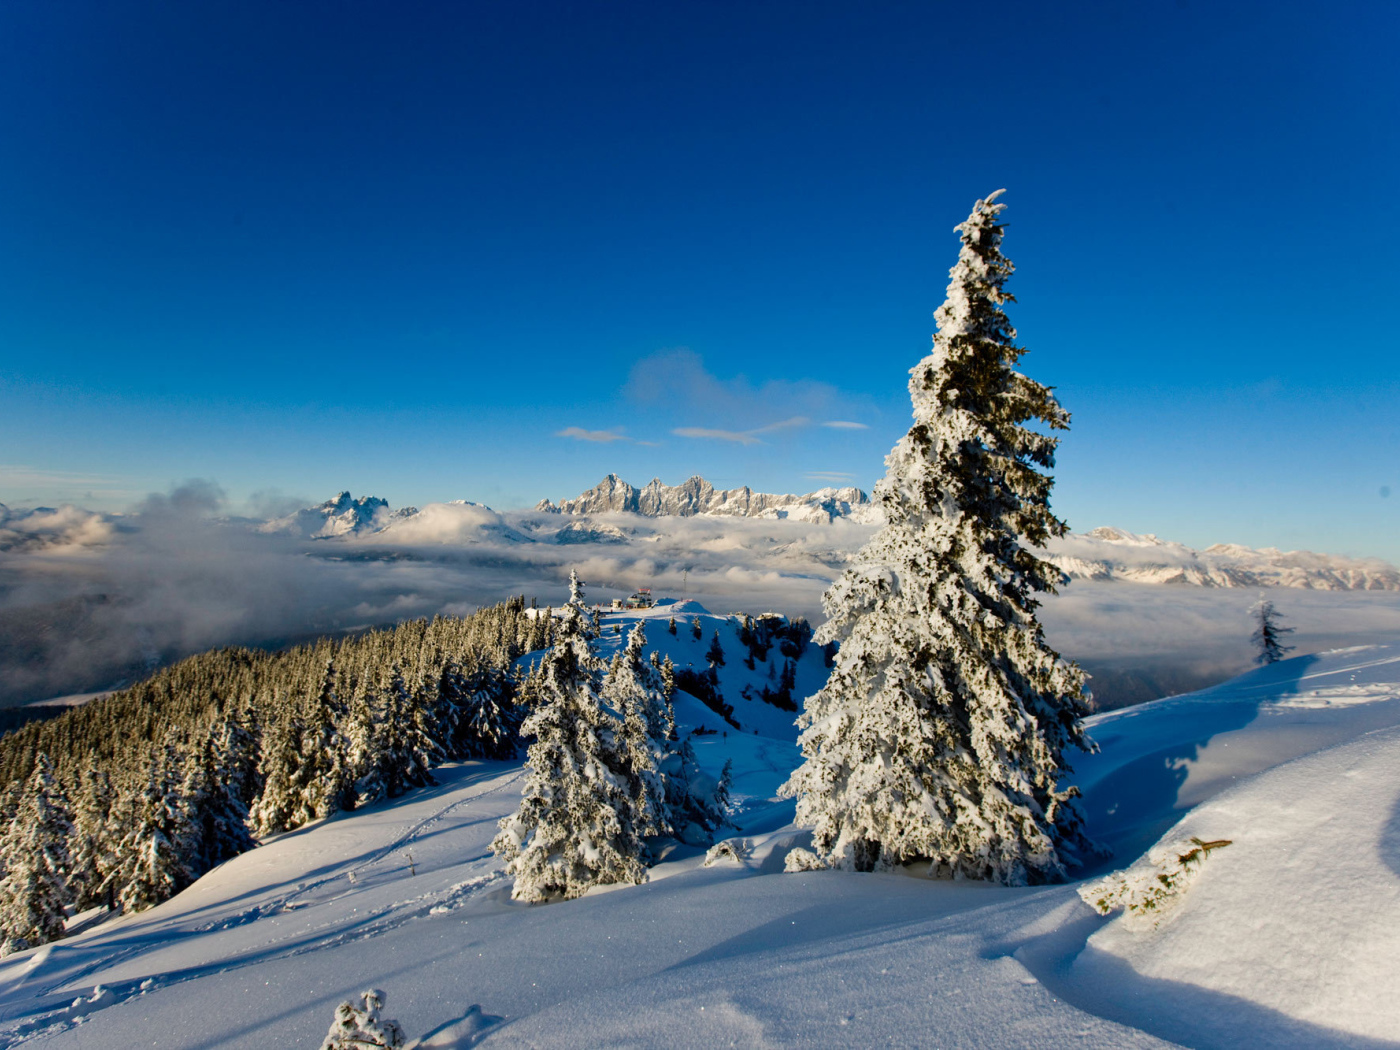 Snow-covered fir at the ski resort of Schladming, Austria